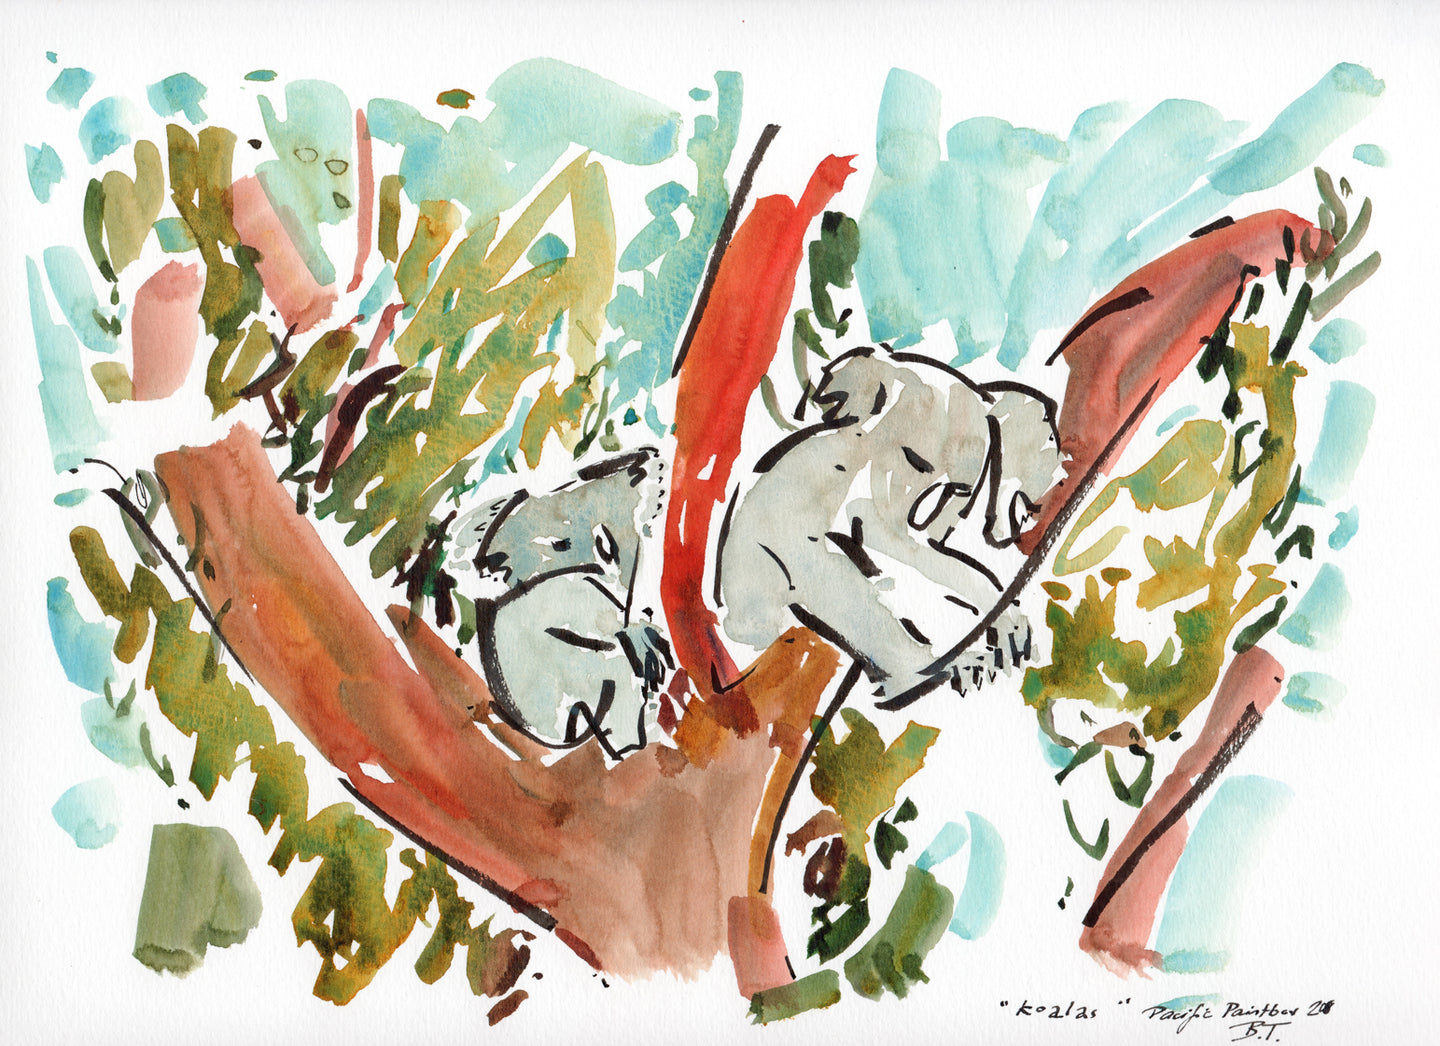 The two koalas in the trees